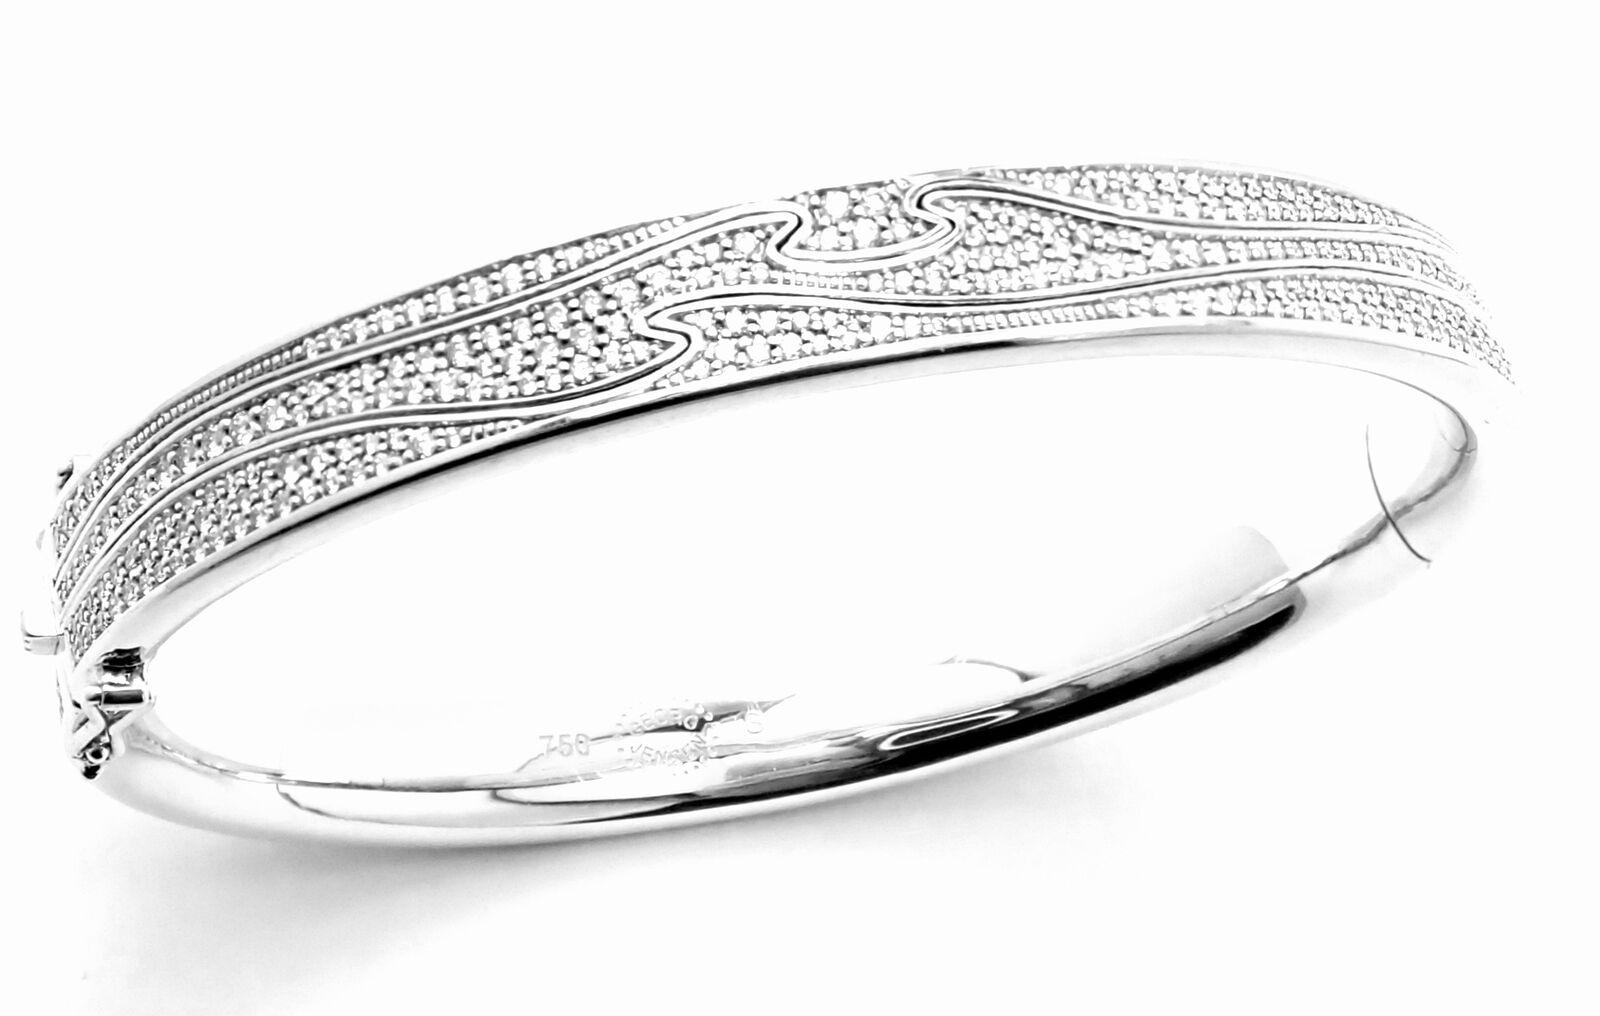 18k White Gold Pave Diamond Fusion Bangle Bracelet by Georg Jensen.
With Round Brilliant Cut Diamonds VS1 clarity, G color total weight approximately 2.06ct
This bracelet is in like new condition and it comes with original box and